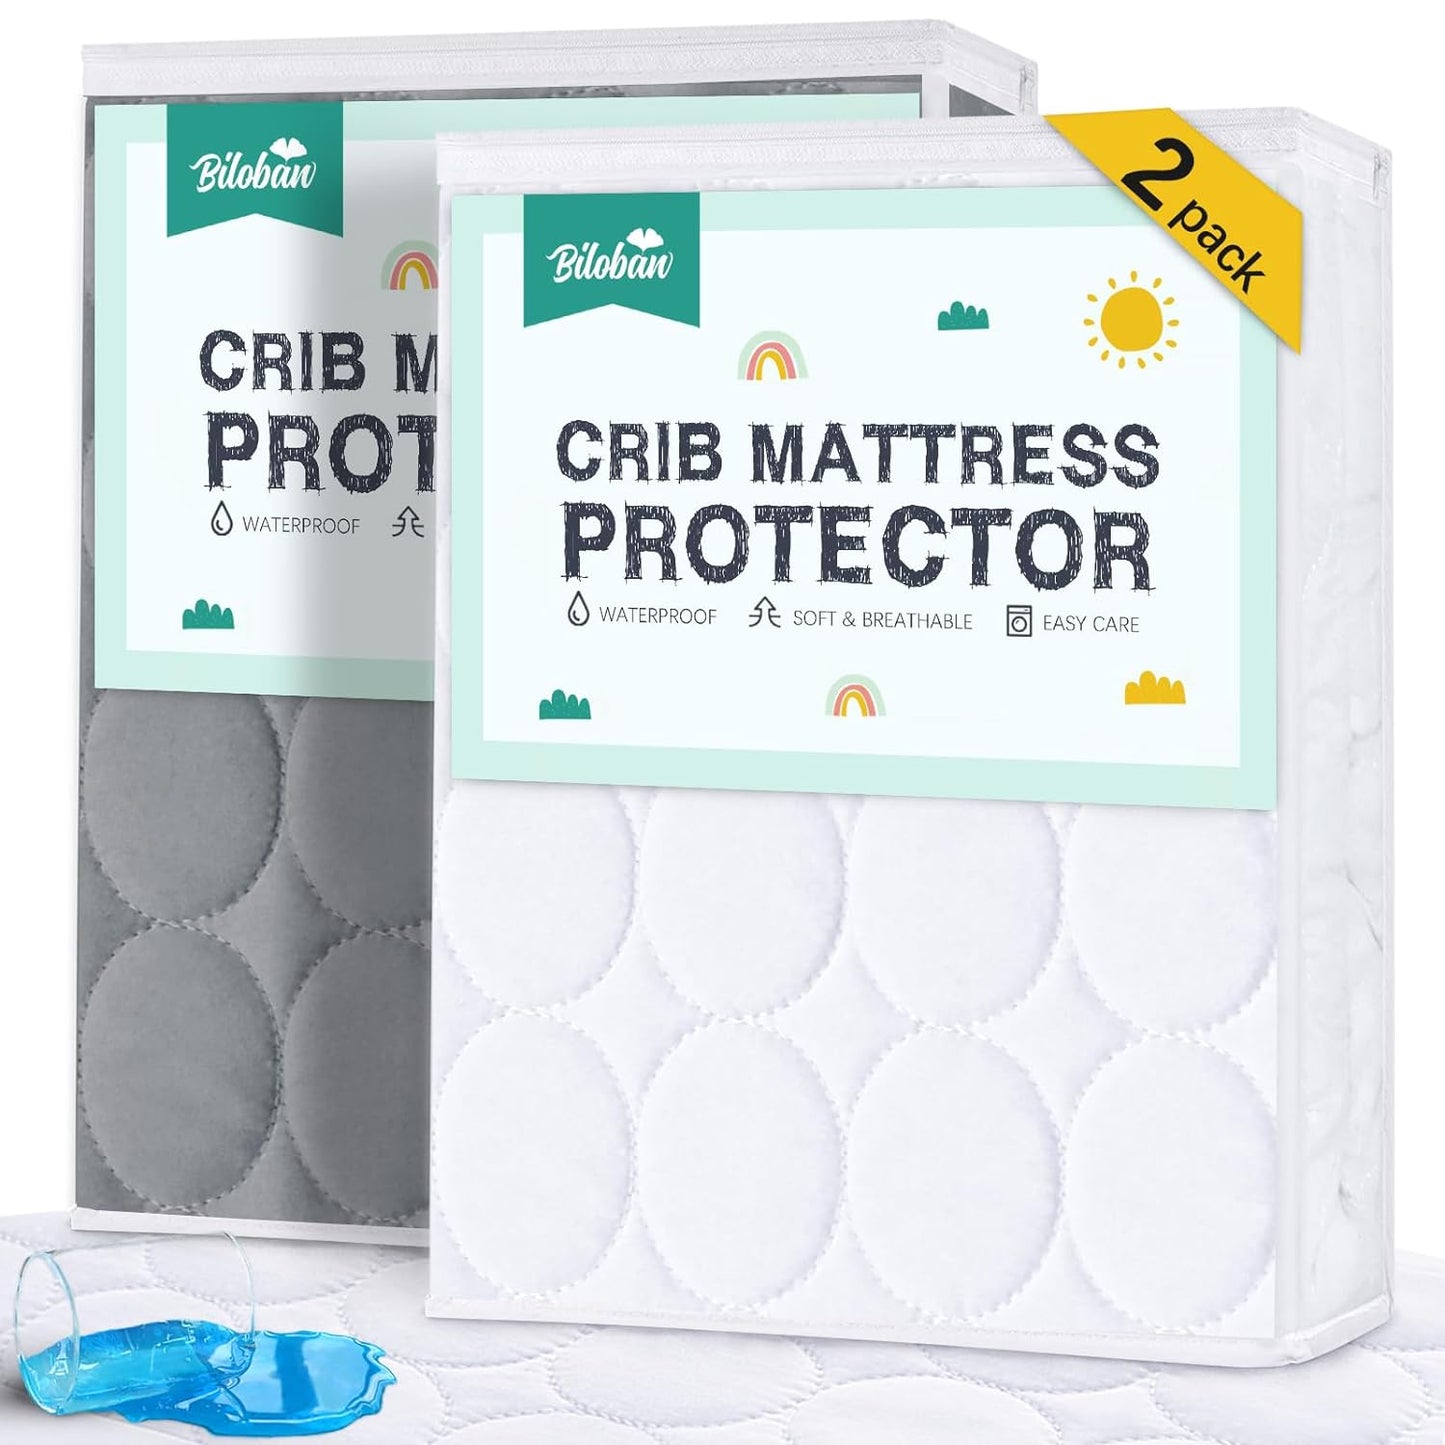 Crib Mattress Protector/ Pad Cover - 2 Pack, Quilted Microfiber, Waterproof (for Standard Crib/ Toddler Bed), Grey & White - Biloban Online Store